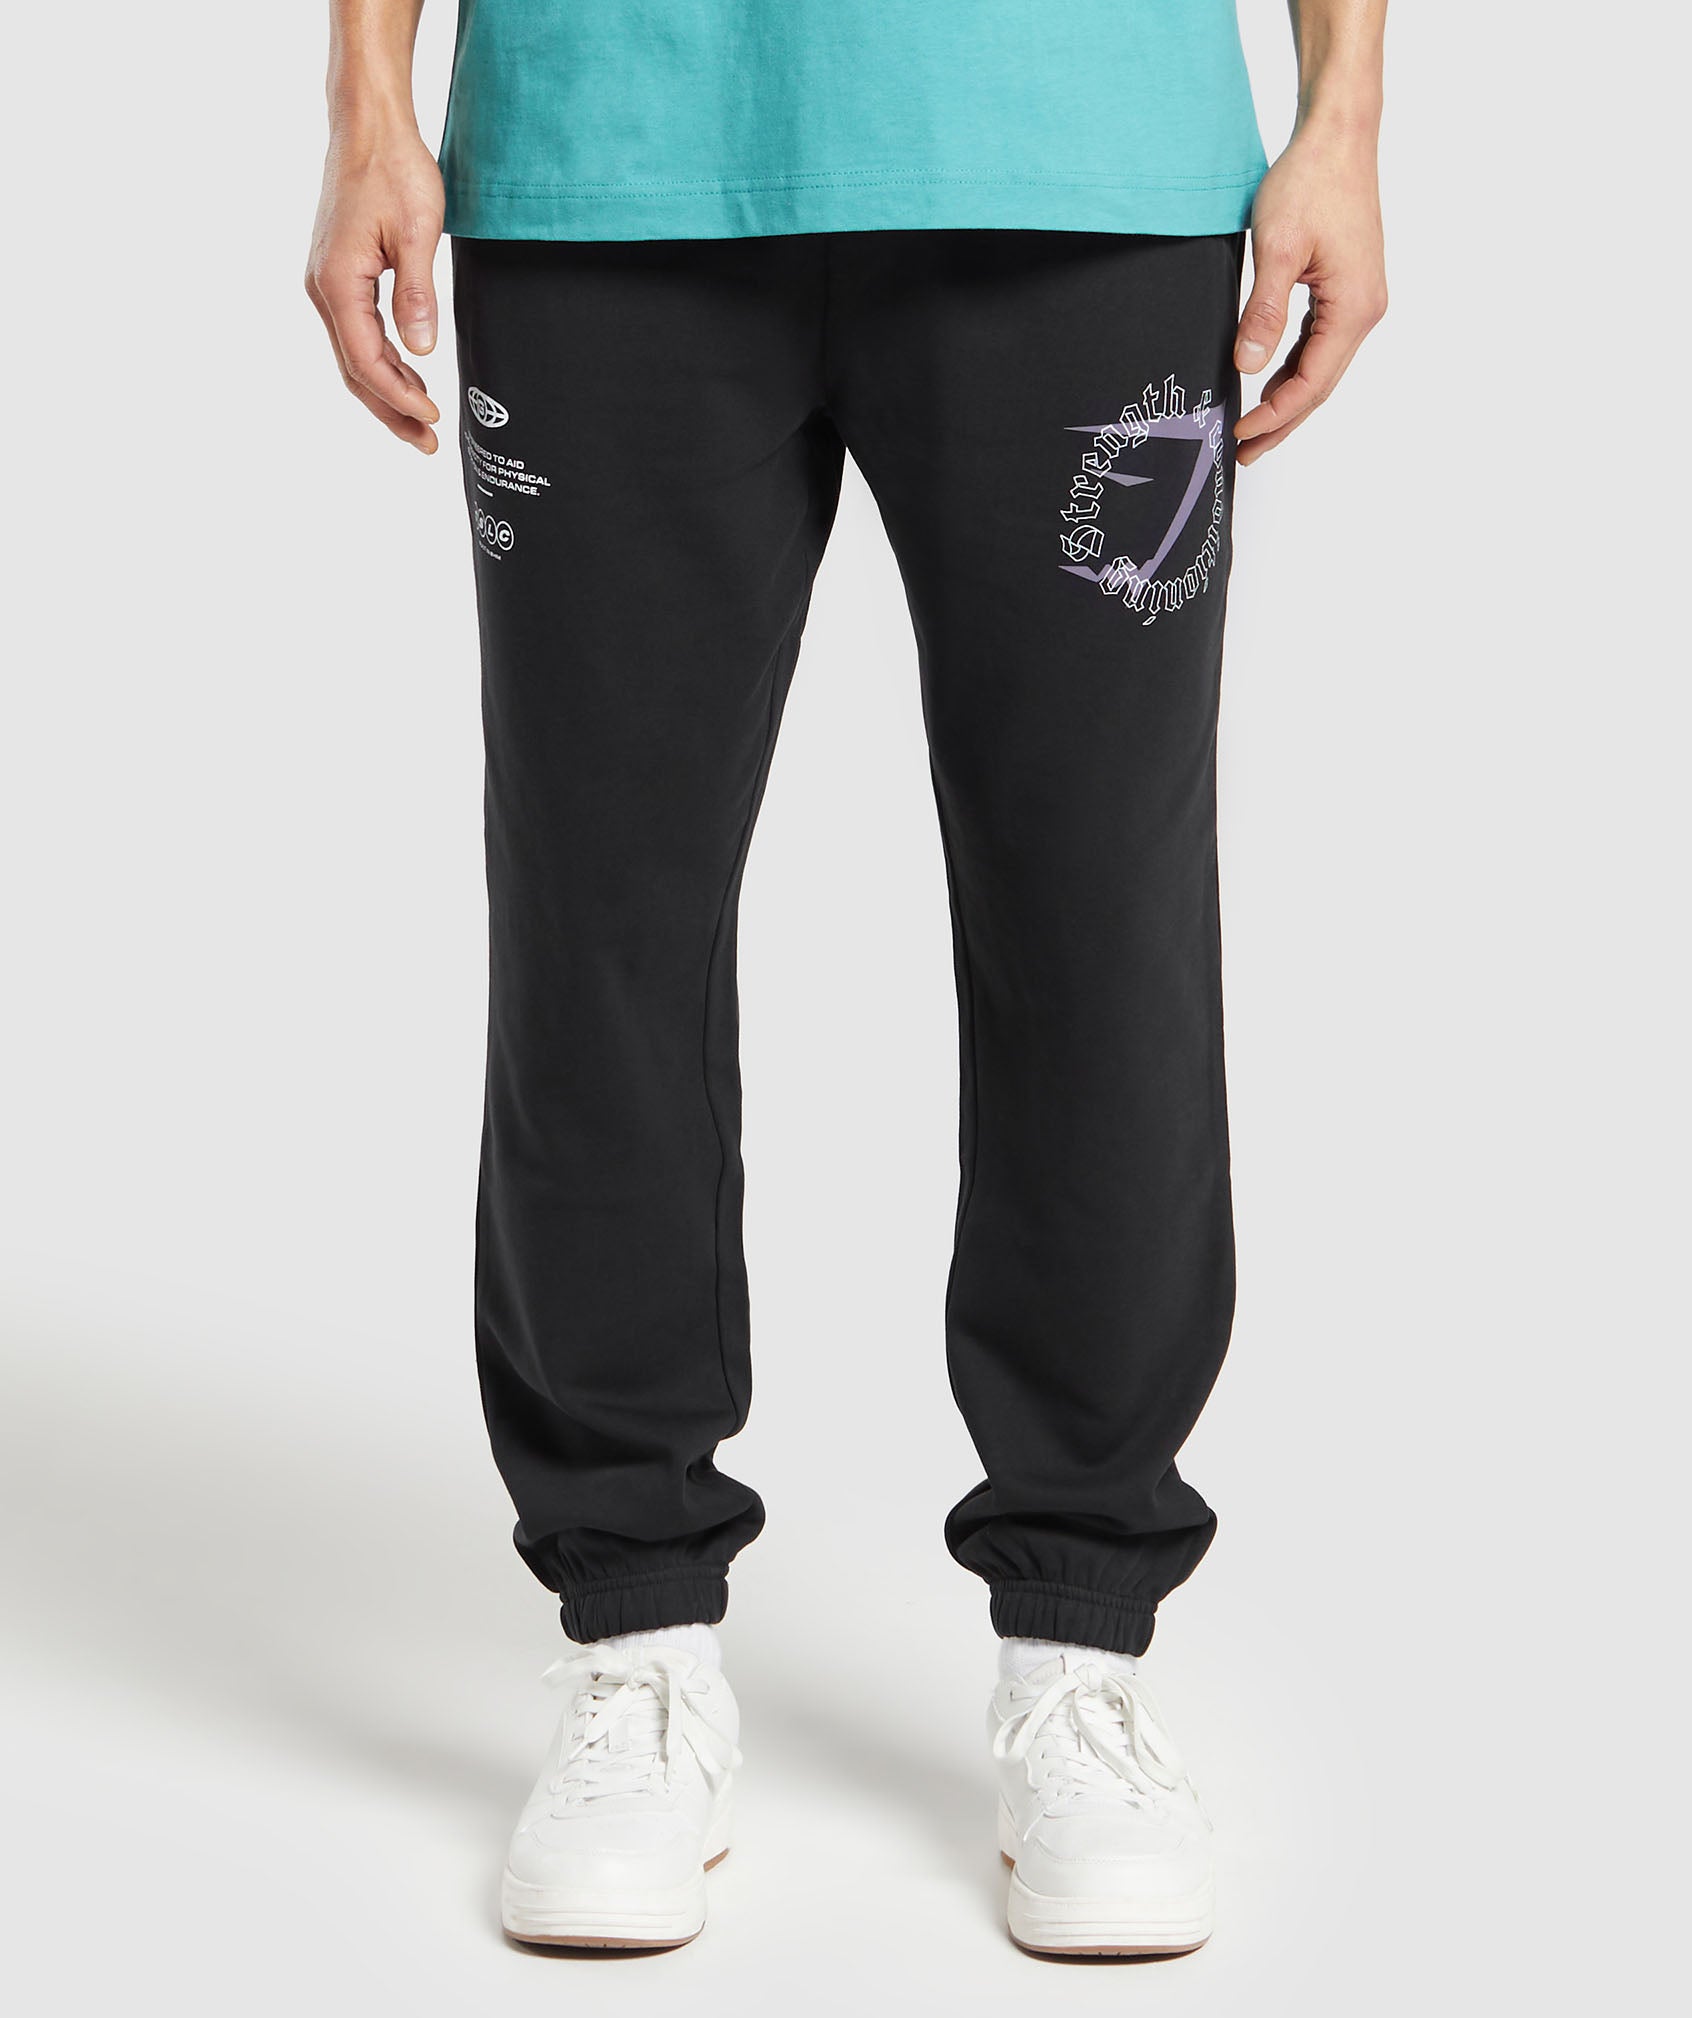 Strength and Conditioning Joggers in Black - view 2